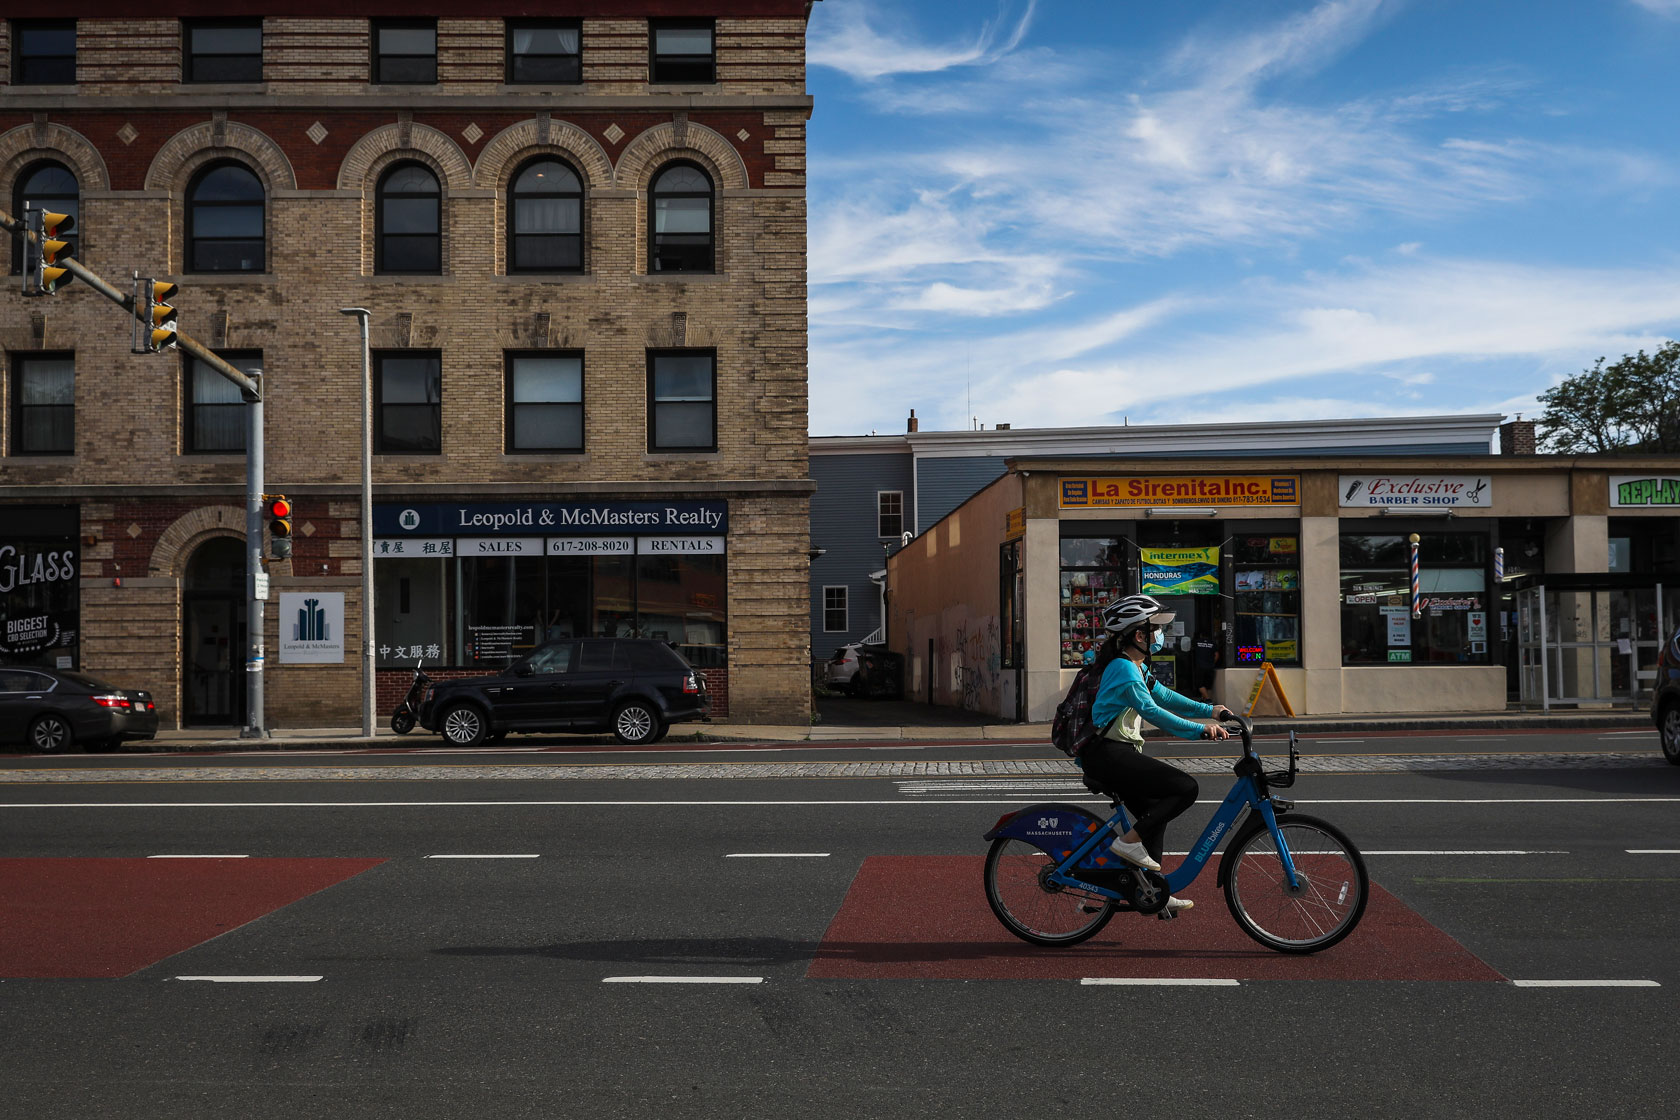 A woman on a bike passes through an intersection in a Boston neighborhood.